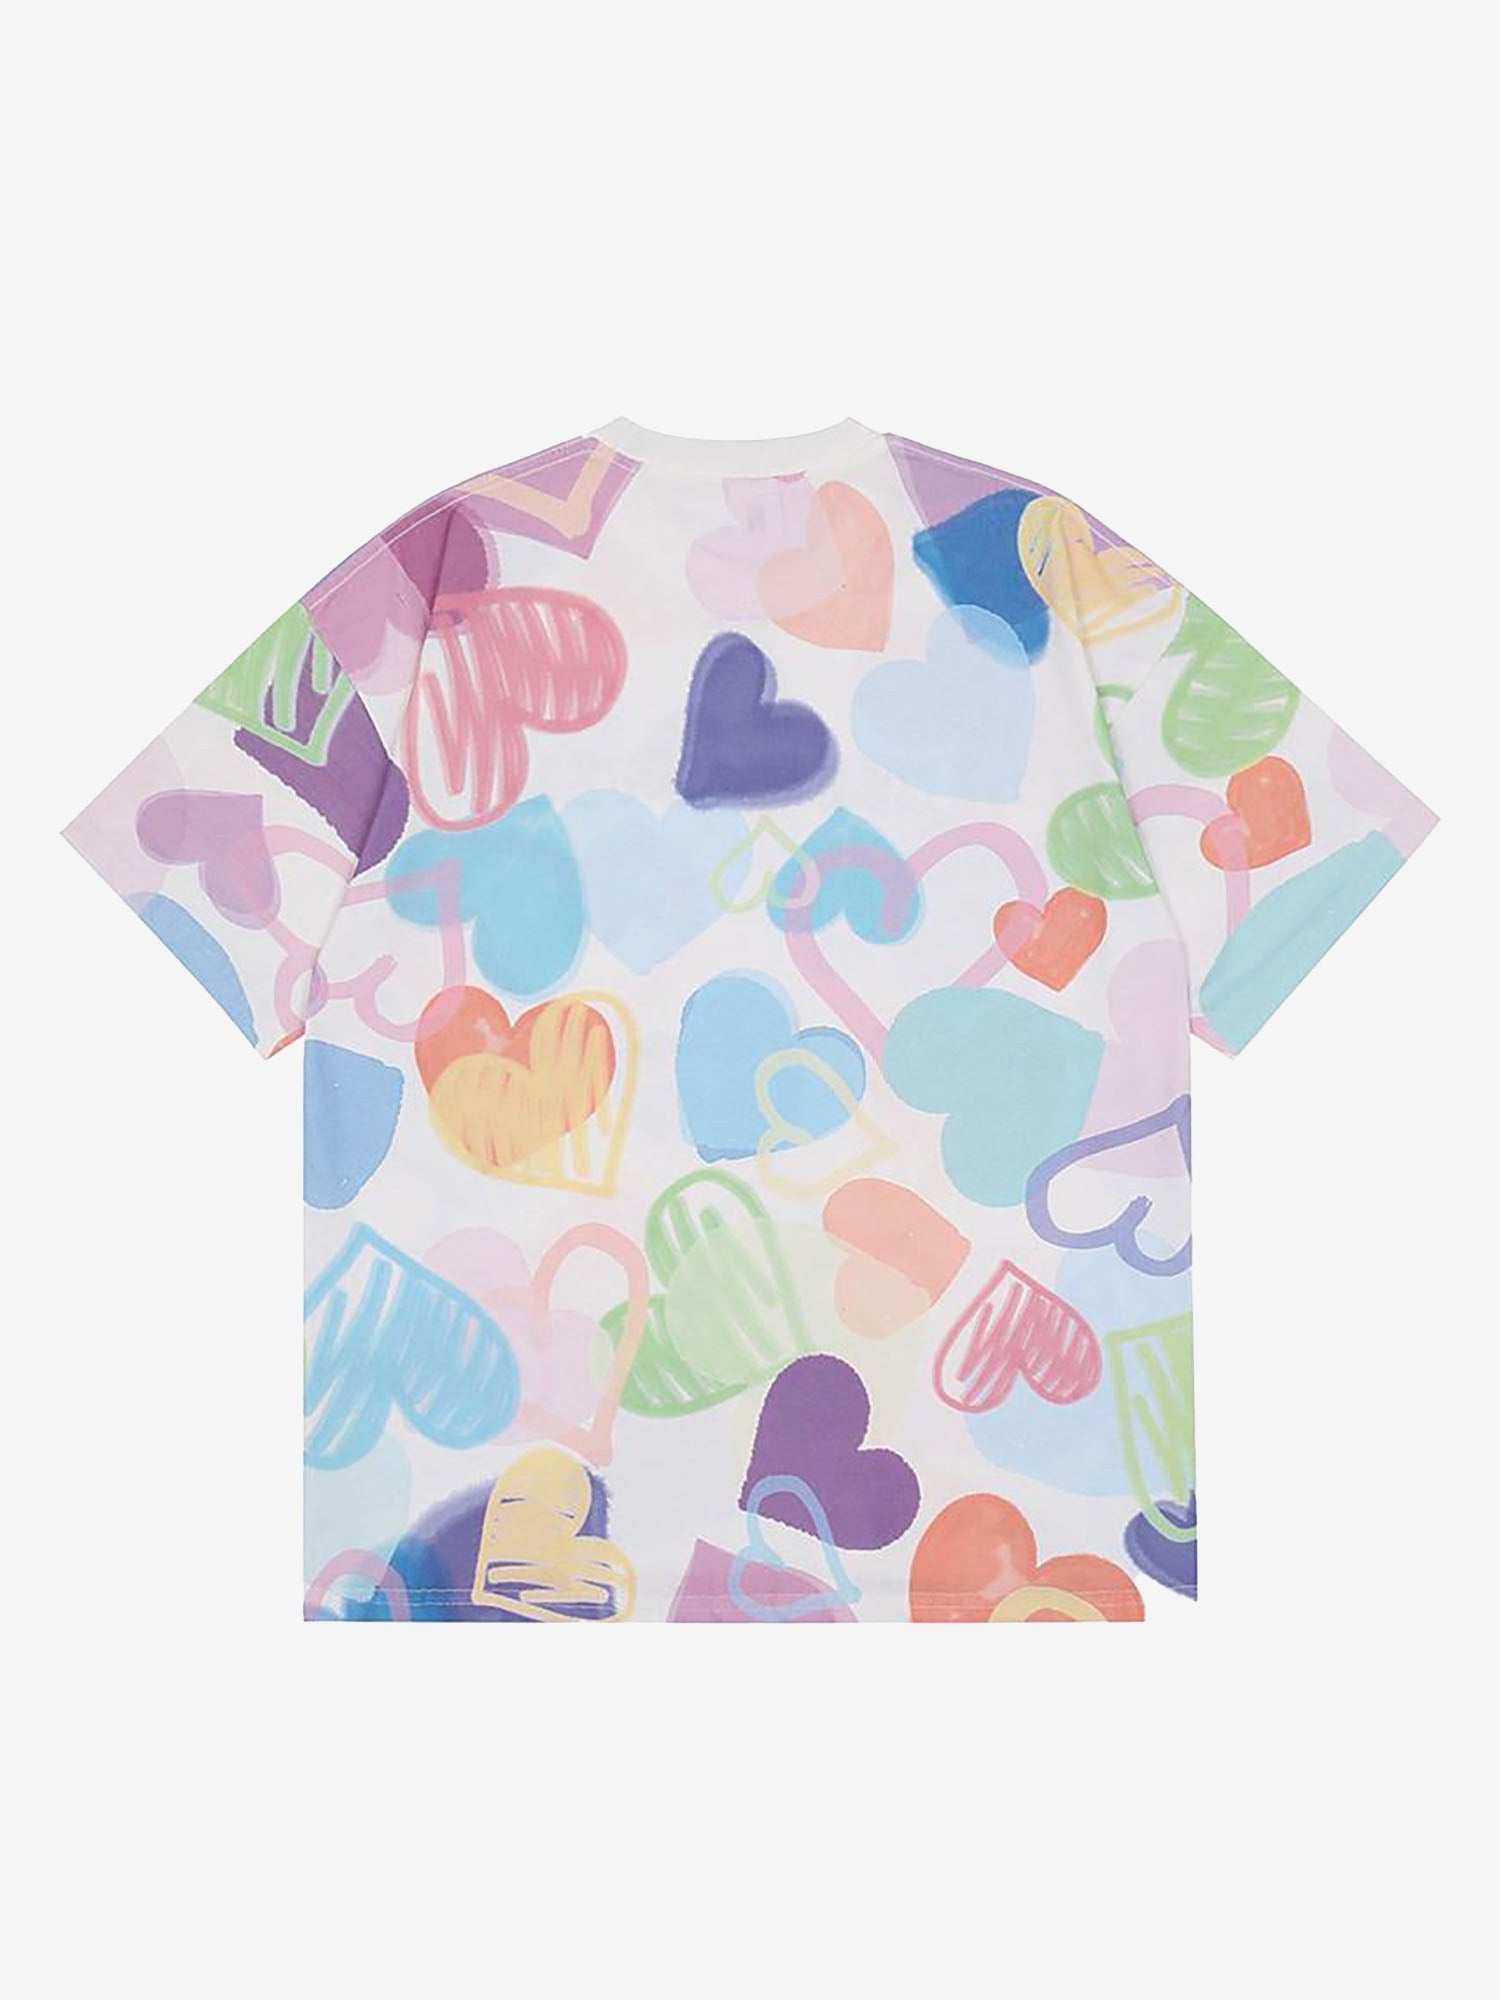 JUSTNOTAG Multicolor Painting Heart Letter Print Short Sleeve Tee